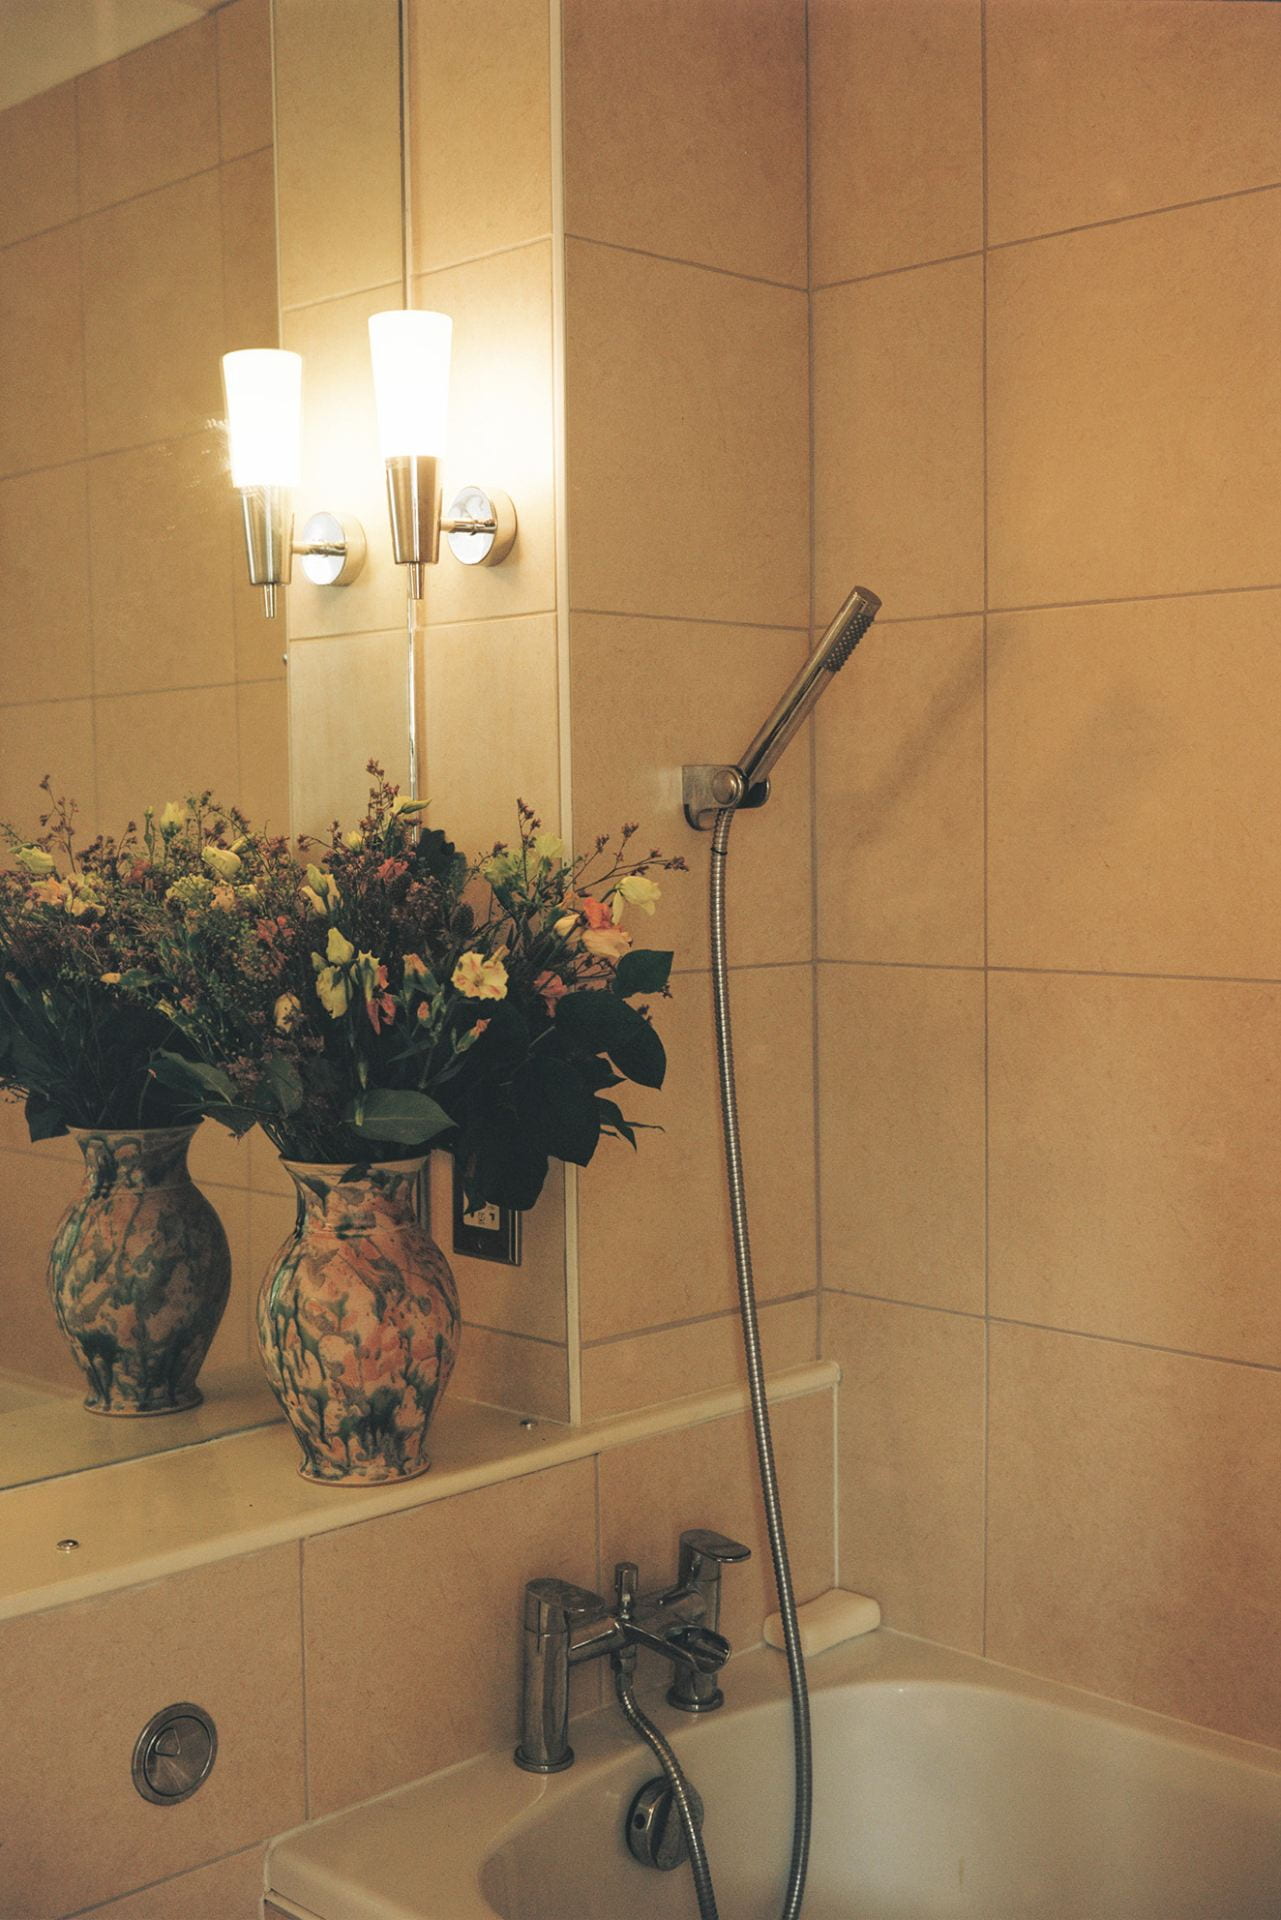 photograph of a bathrrom with a showerhead and a vase of flowers